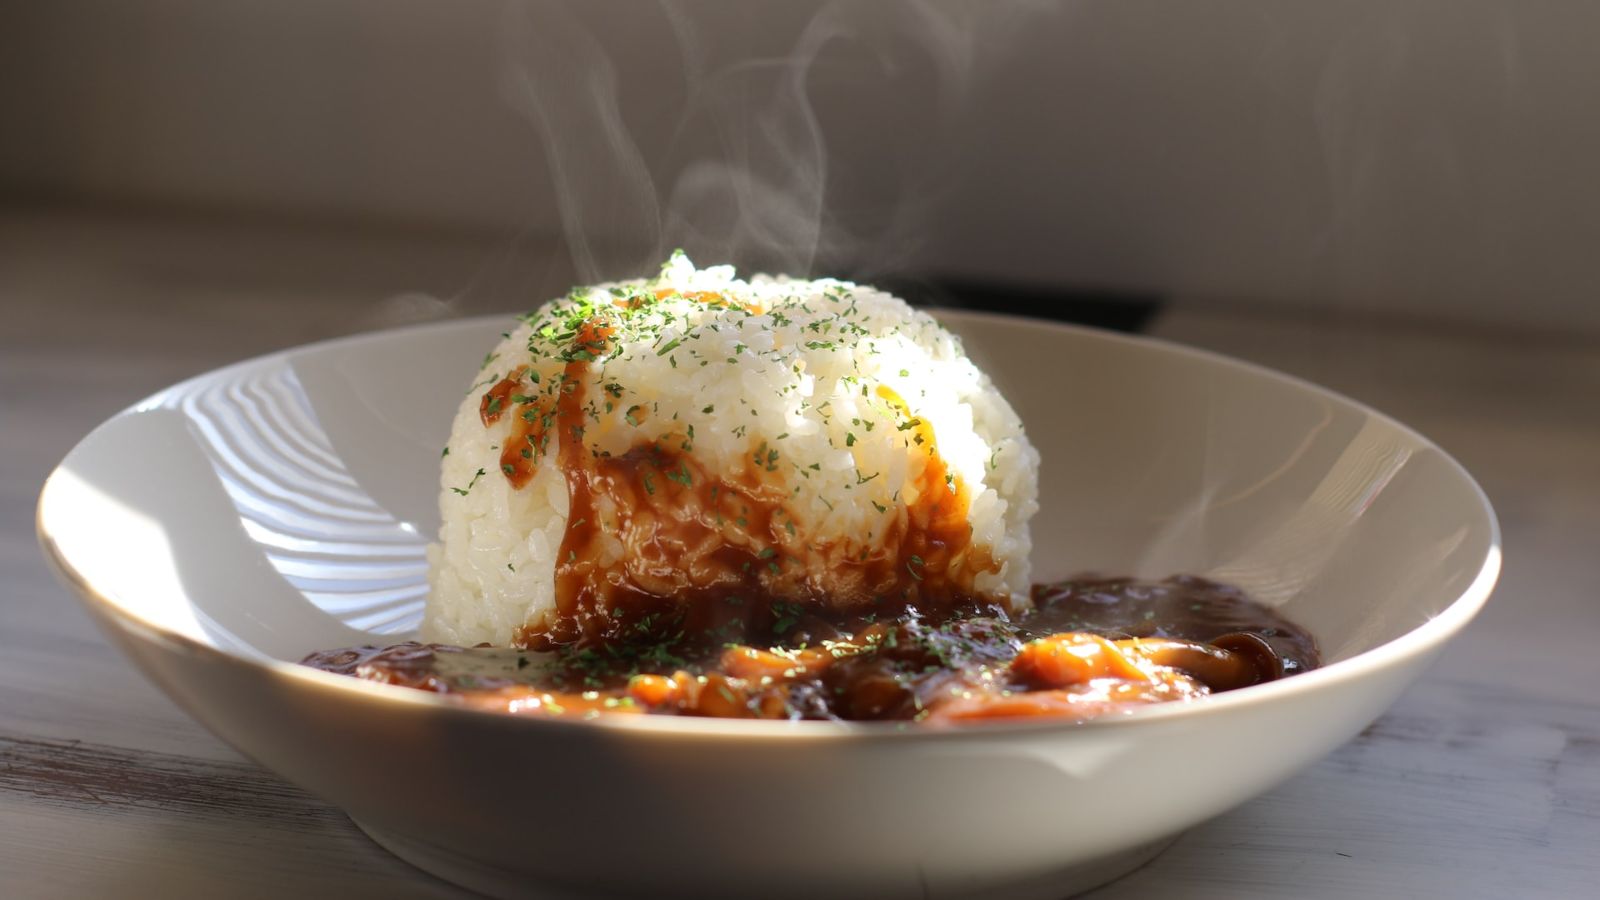 Japanese curry rice, food in Japan - Point Hacks